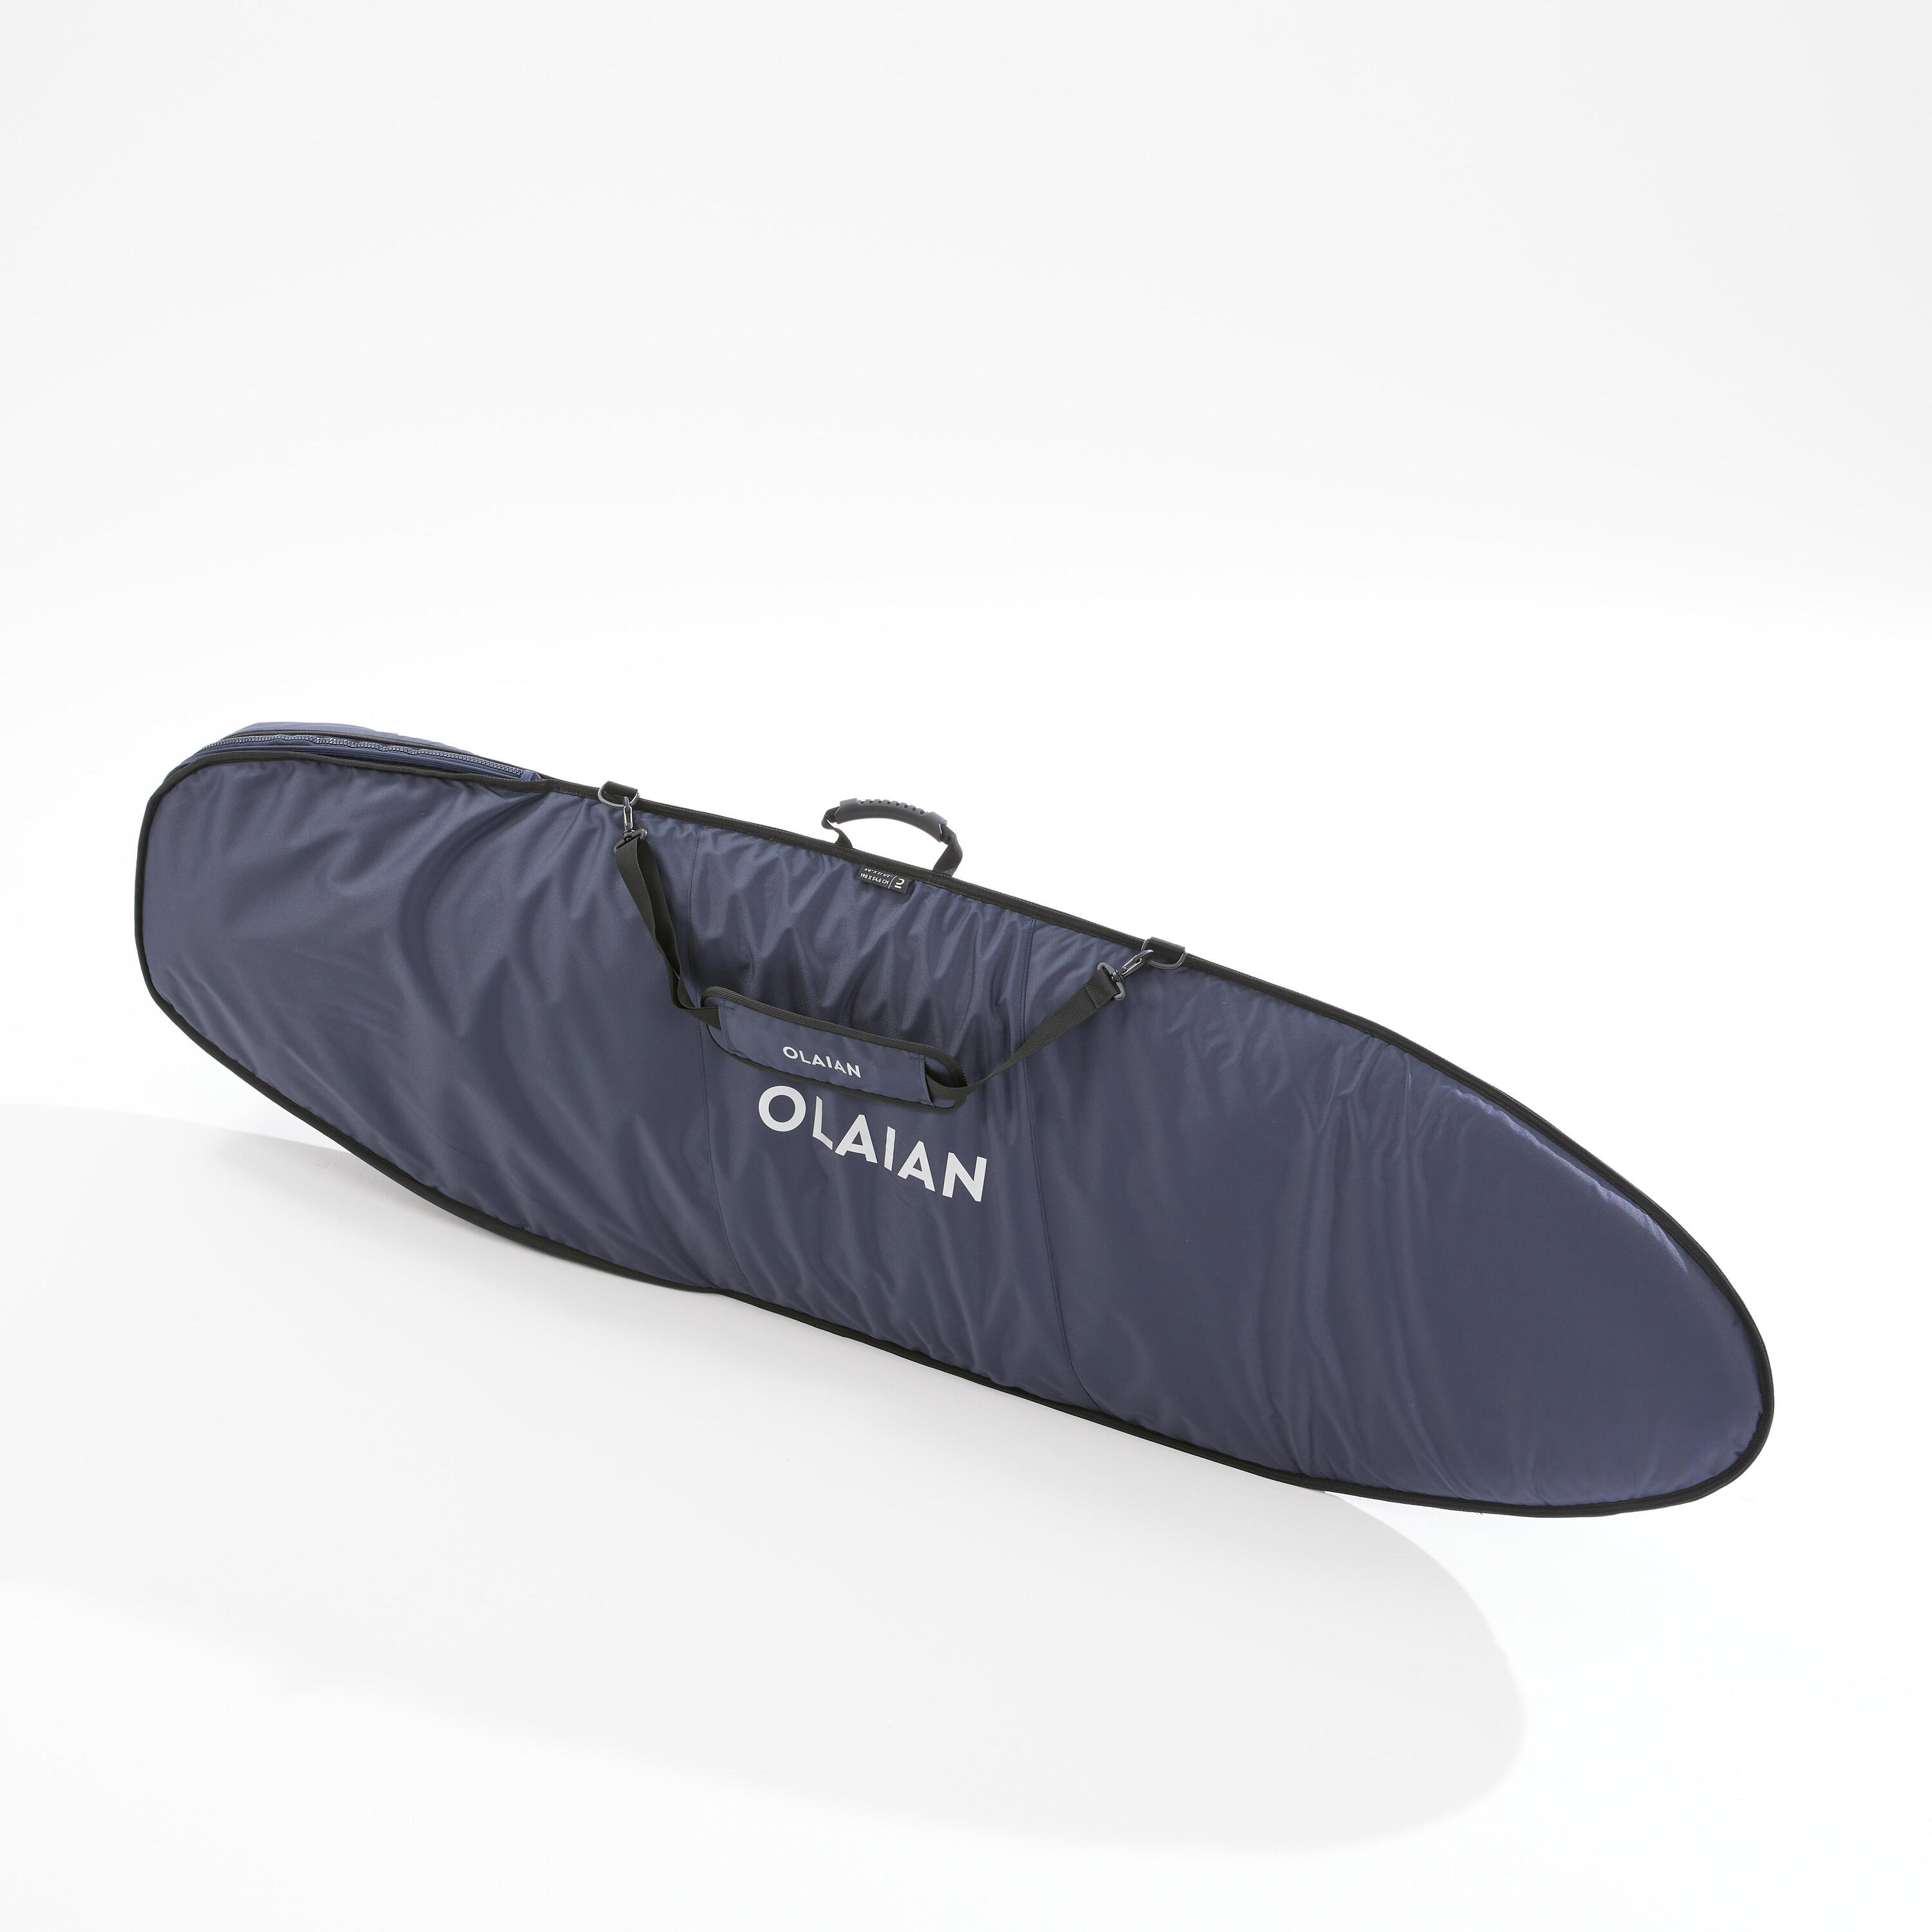 OLAIAN TRAVEL COVER 900 for surfboards up to 6'1" x 21 1/2”